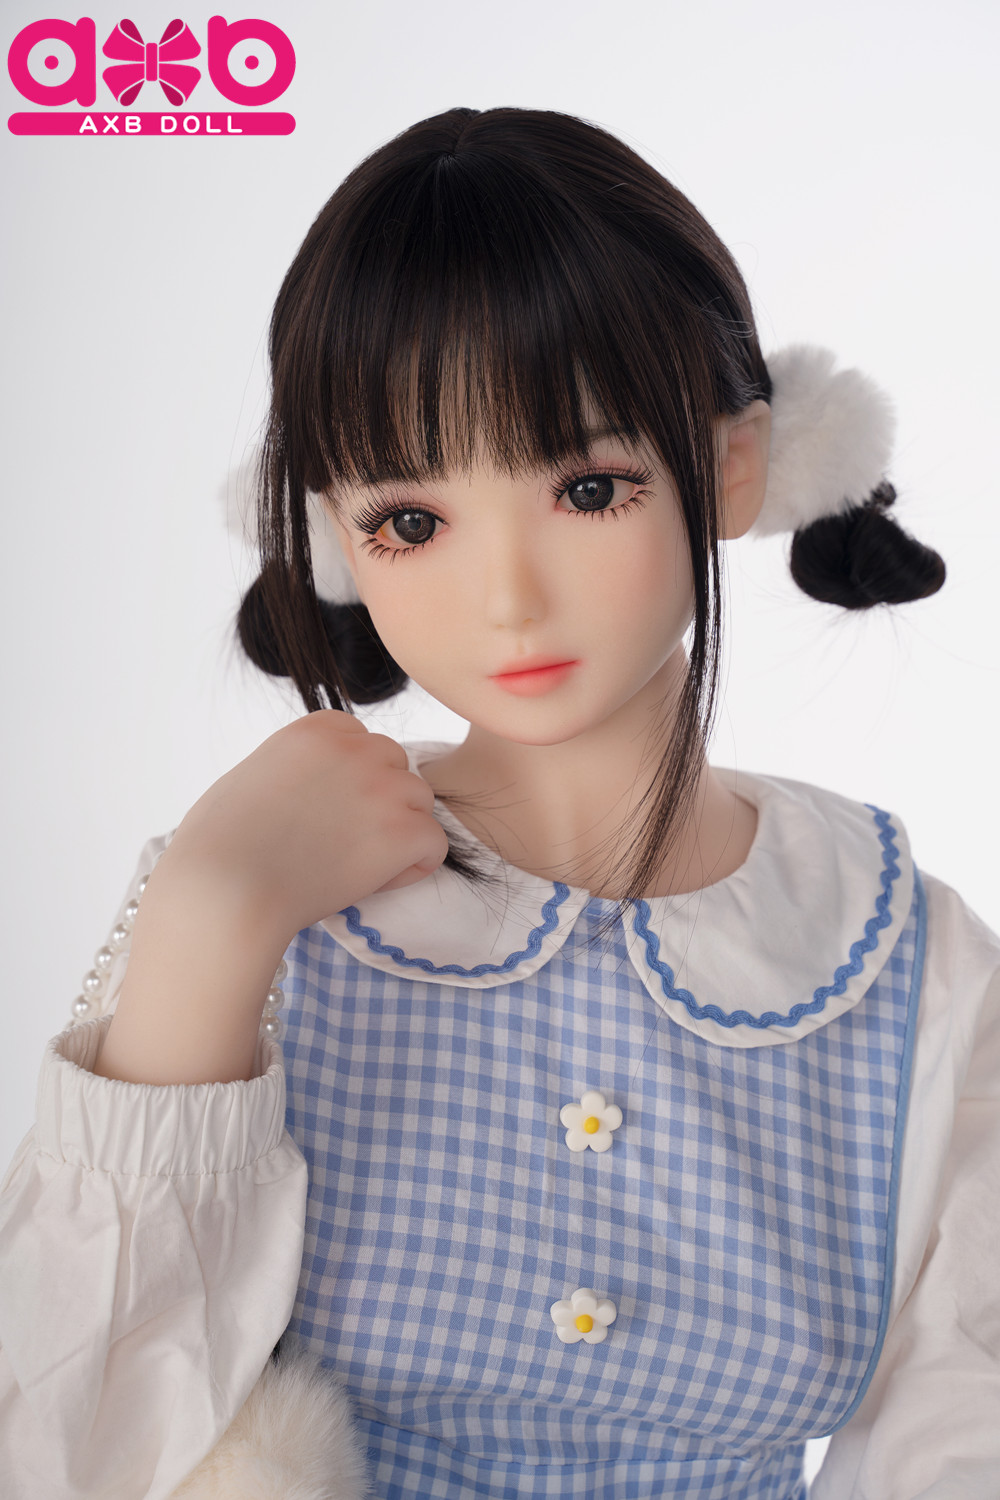 AXBDOLL 140cm A84# TPE Oral Love Doll Life Size Sex Dolls - Click Image to Close